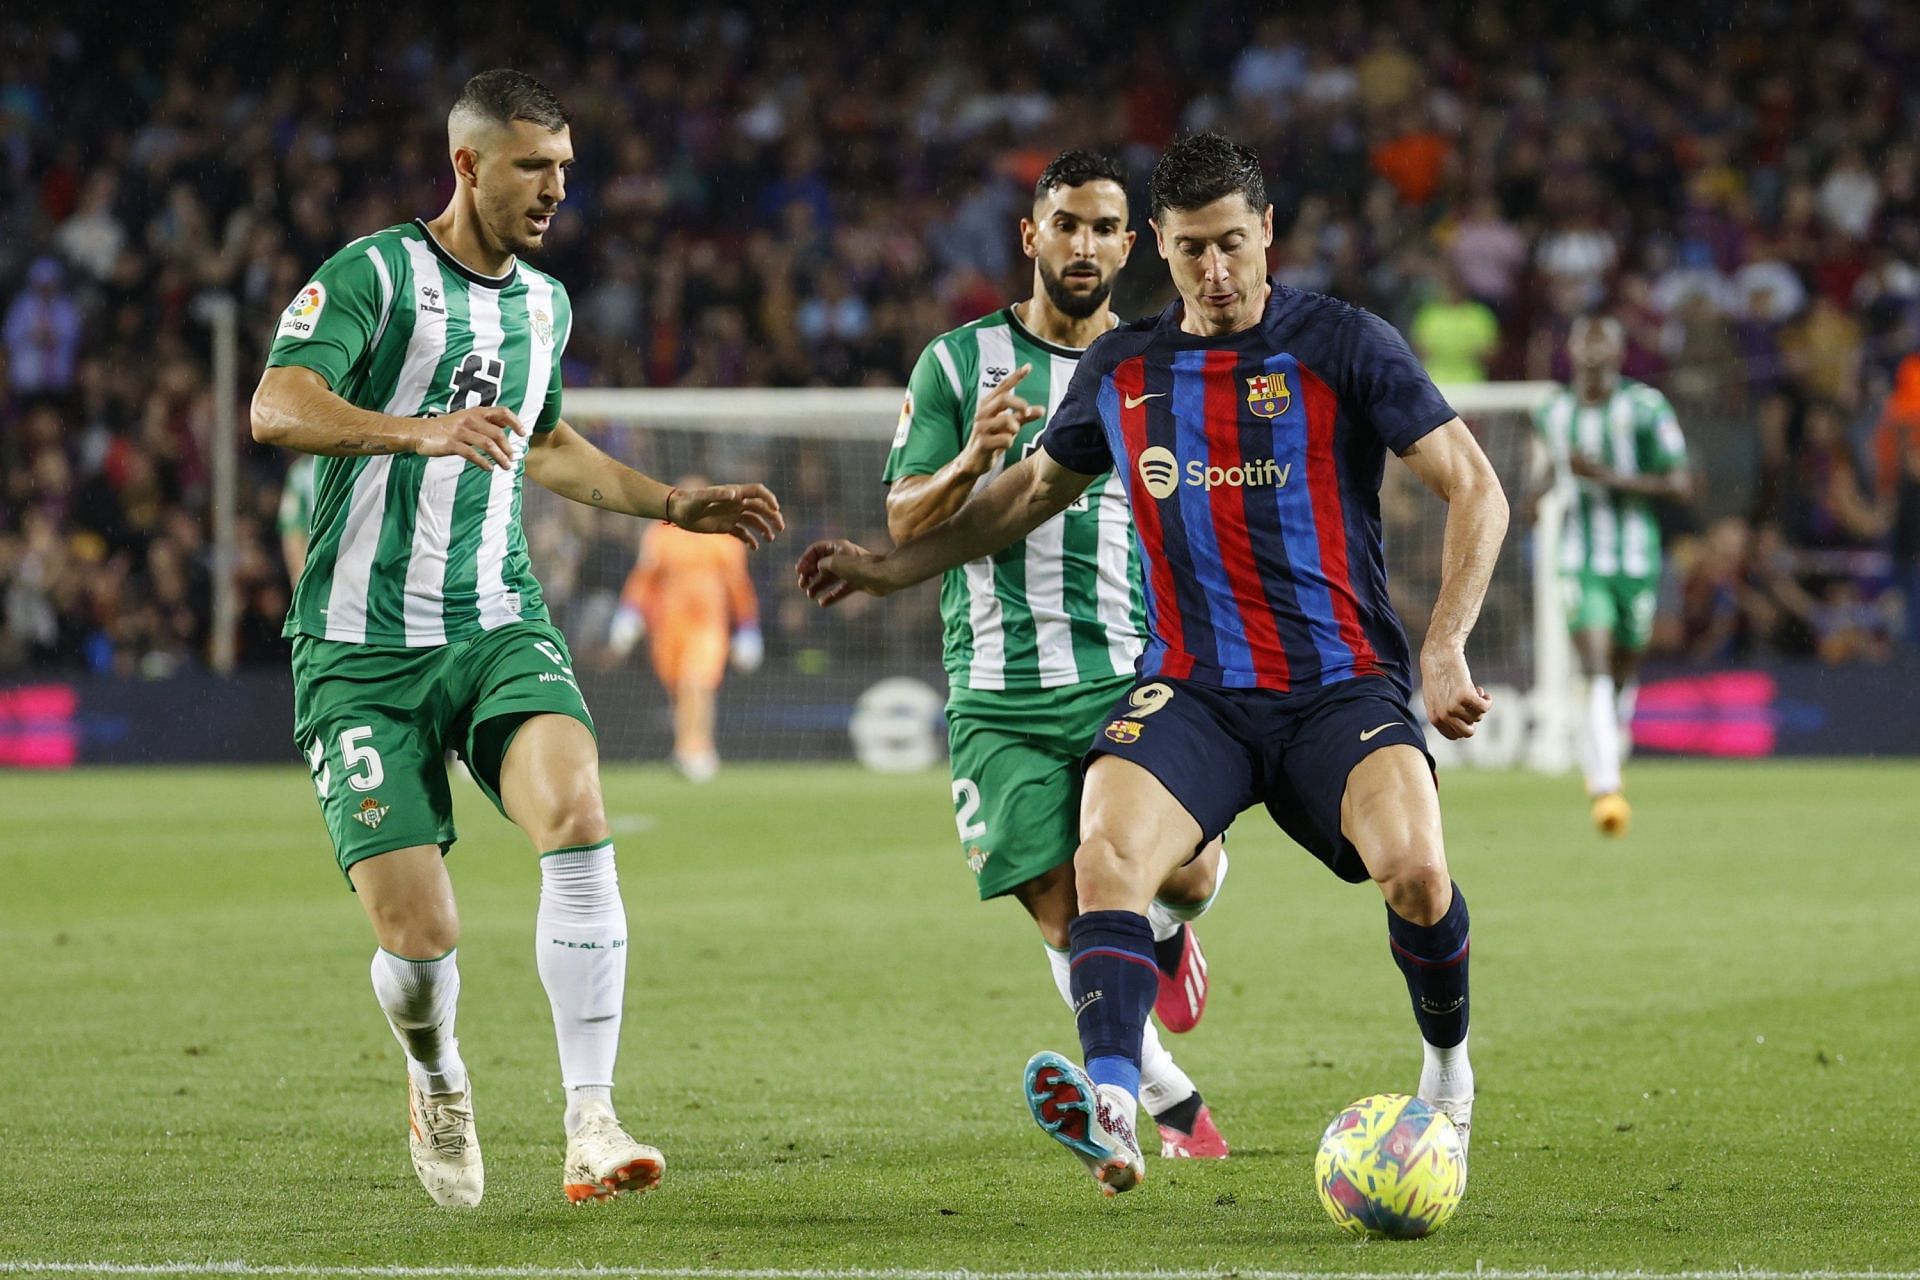 Barcelona have won their last three games to Betis 